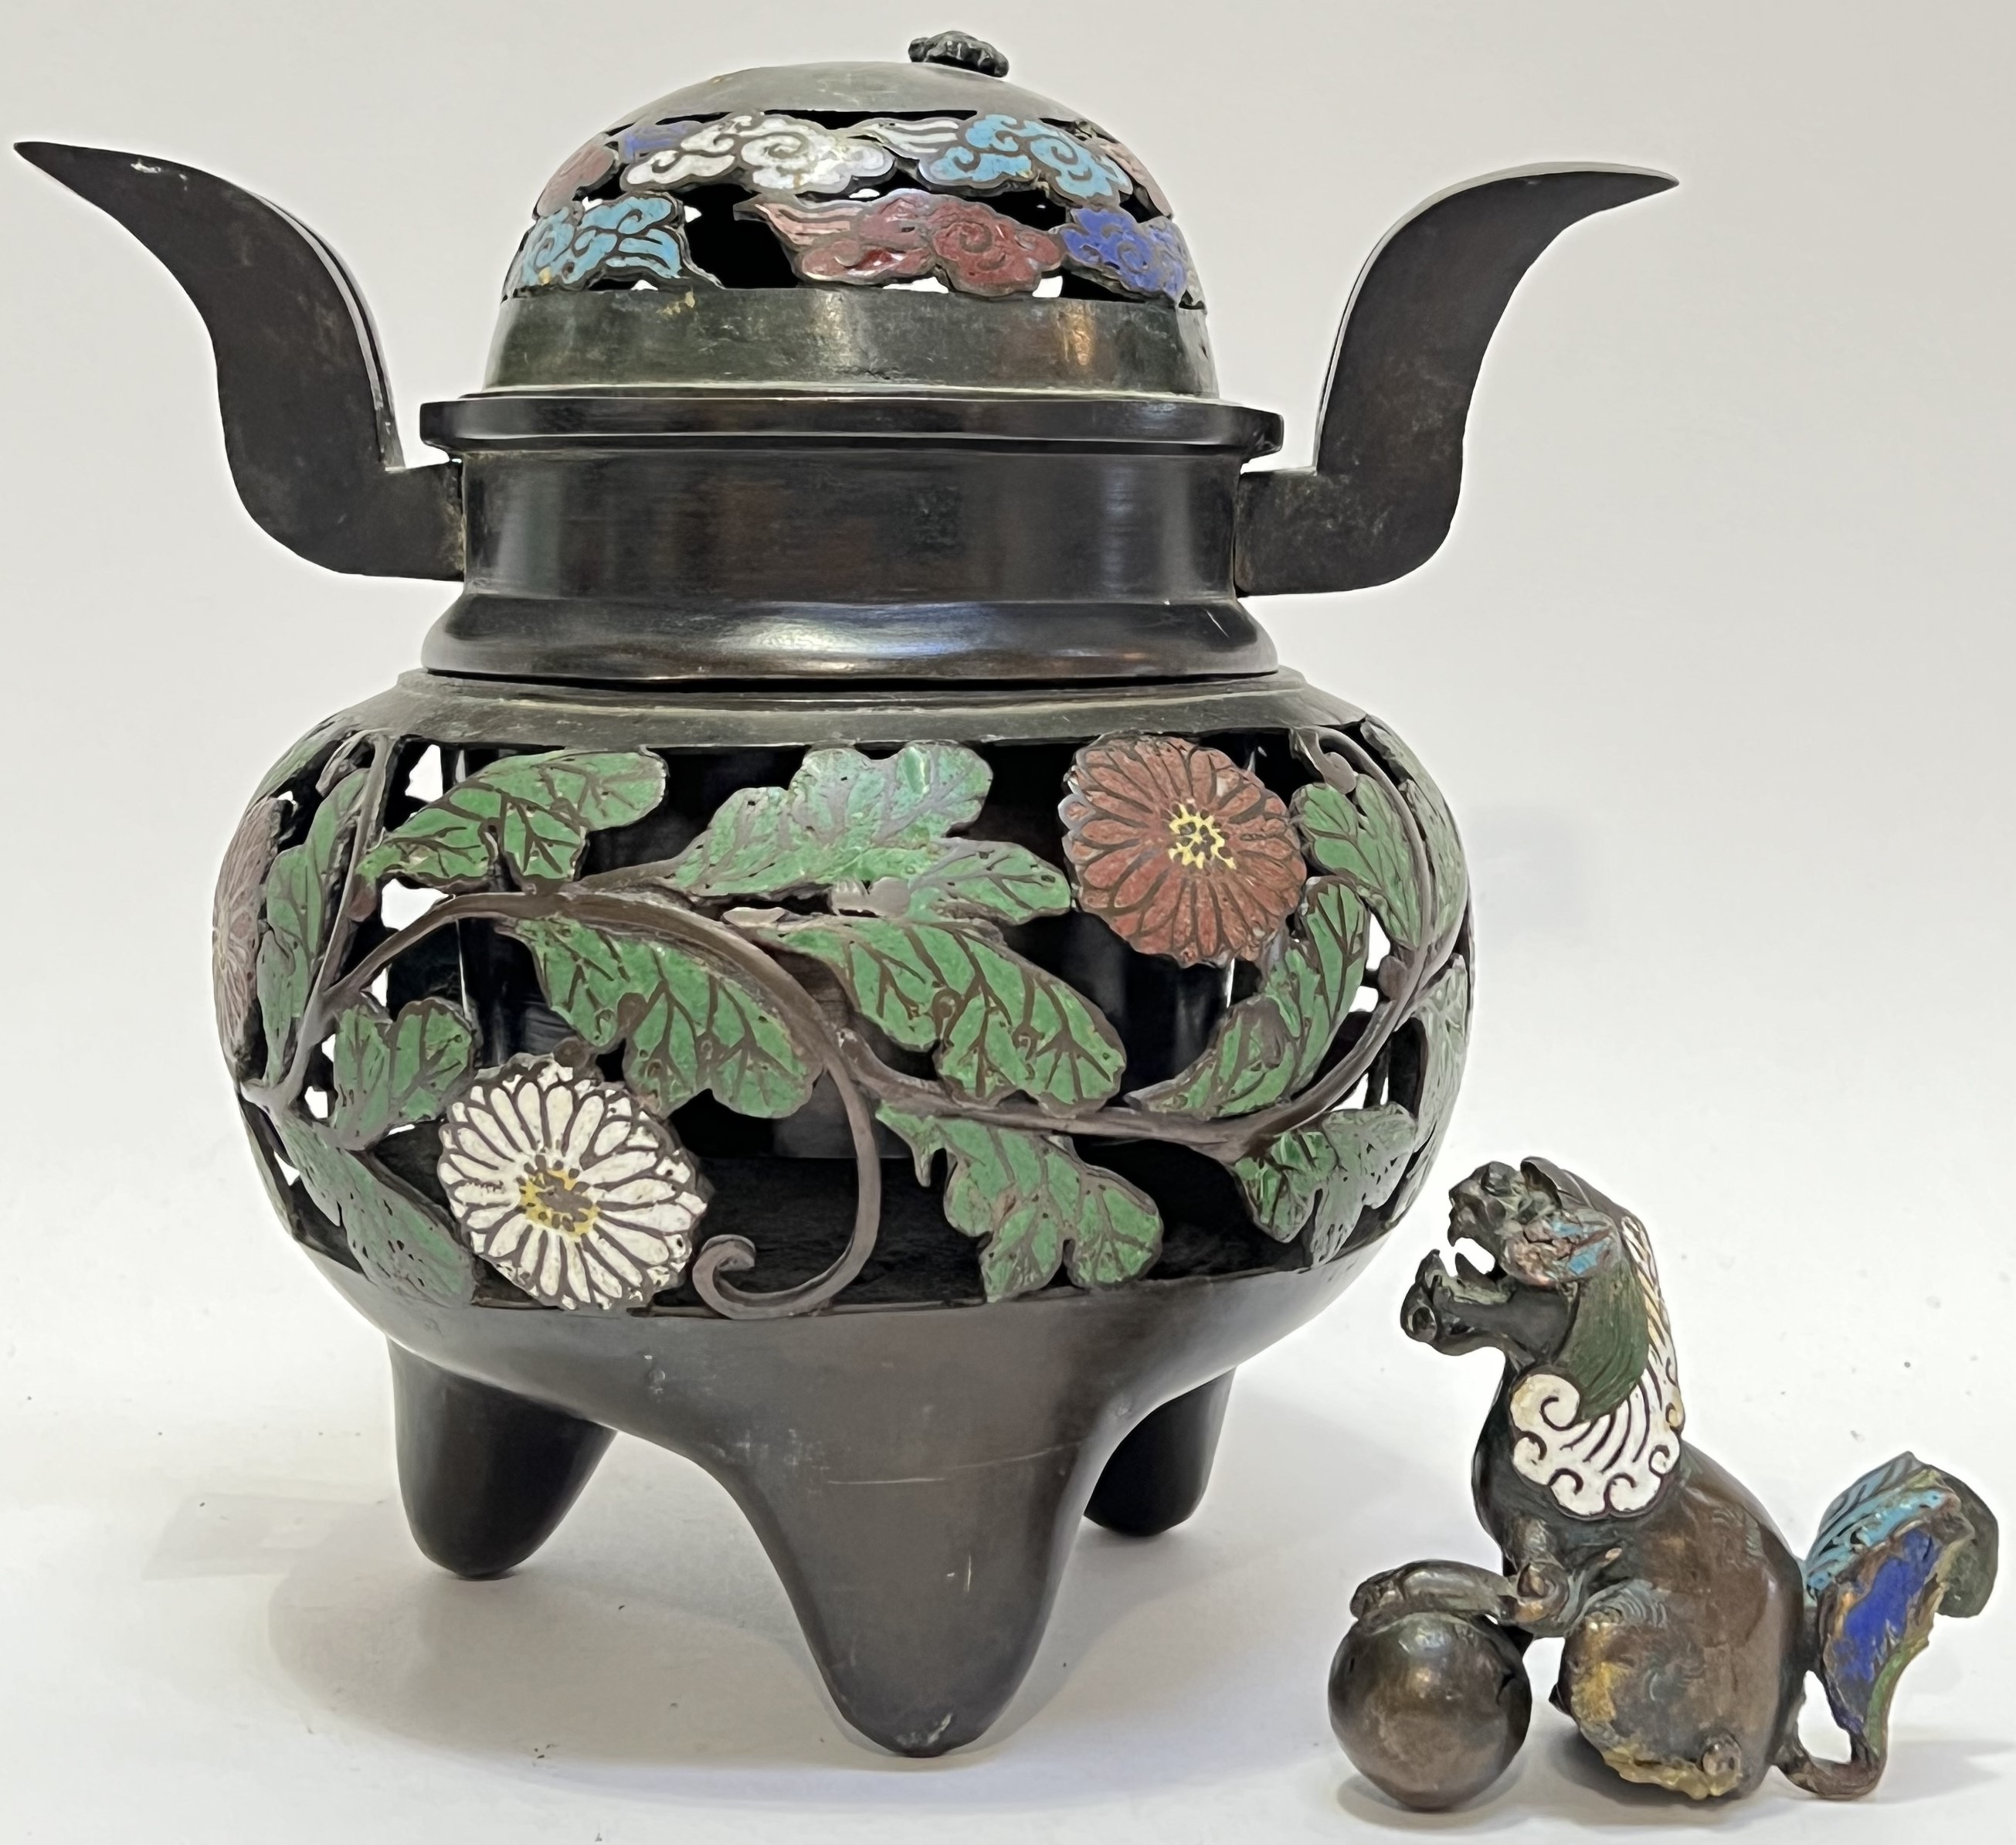 A Japanese bronze and champleve enamel tripod koro/incense burner with polychrome chrysanthemum